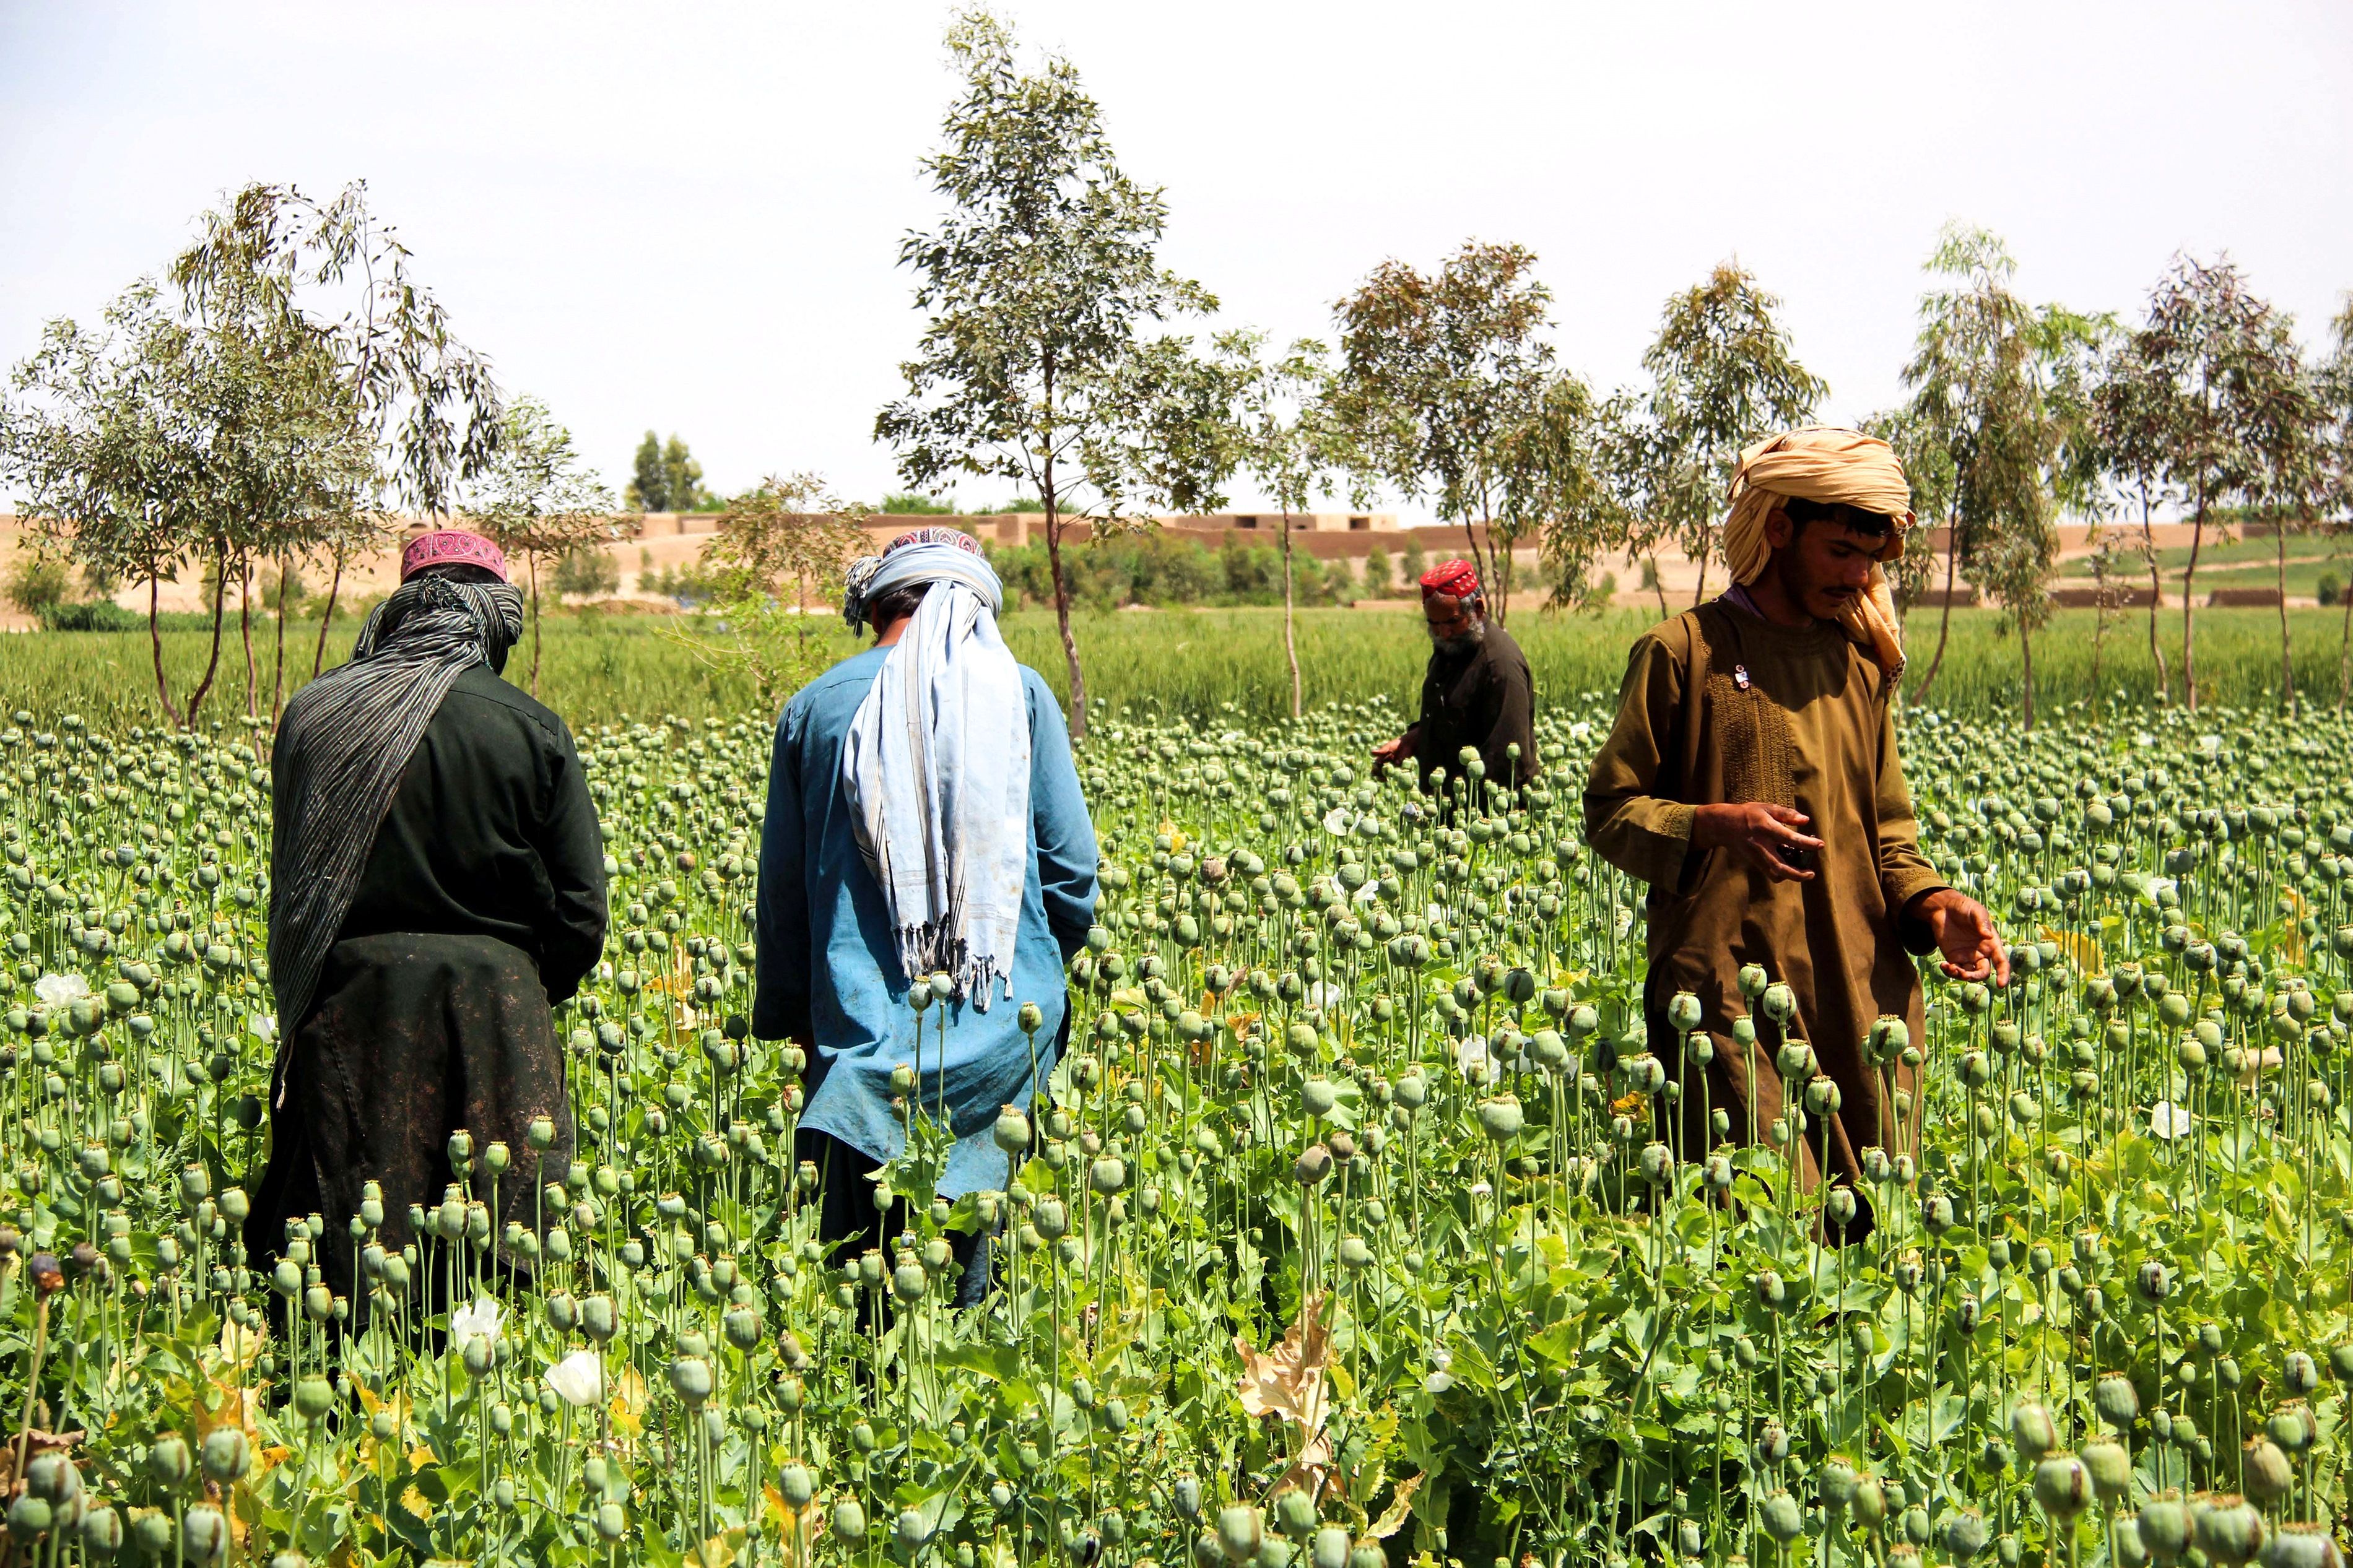 Afghan farmers harvest opium sap from a poppy field in the Gereshk district of Helmand province